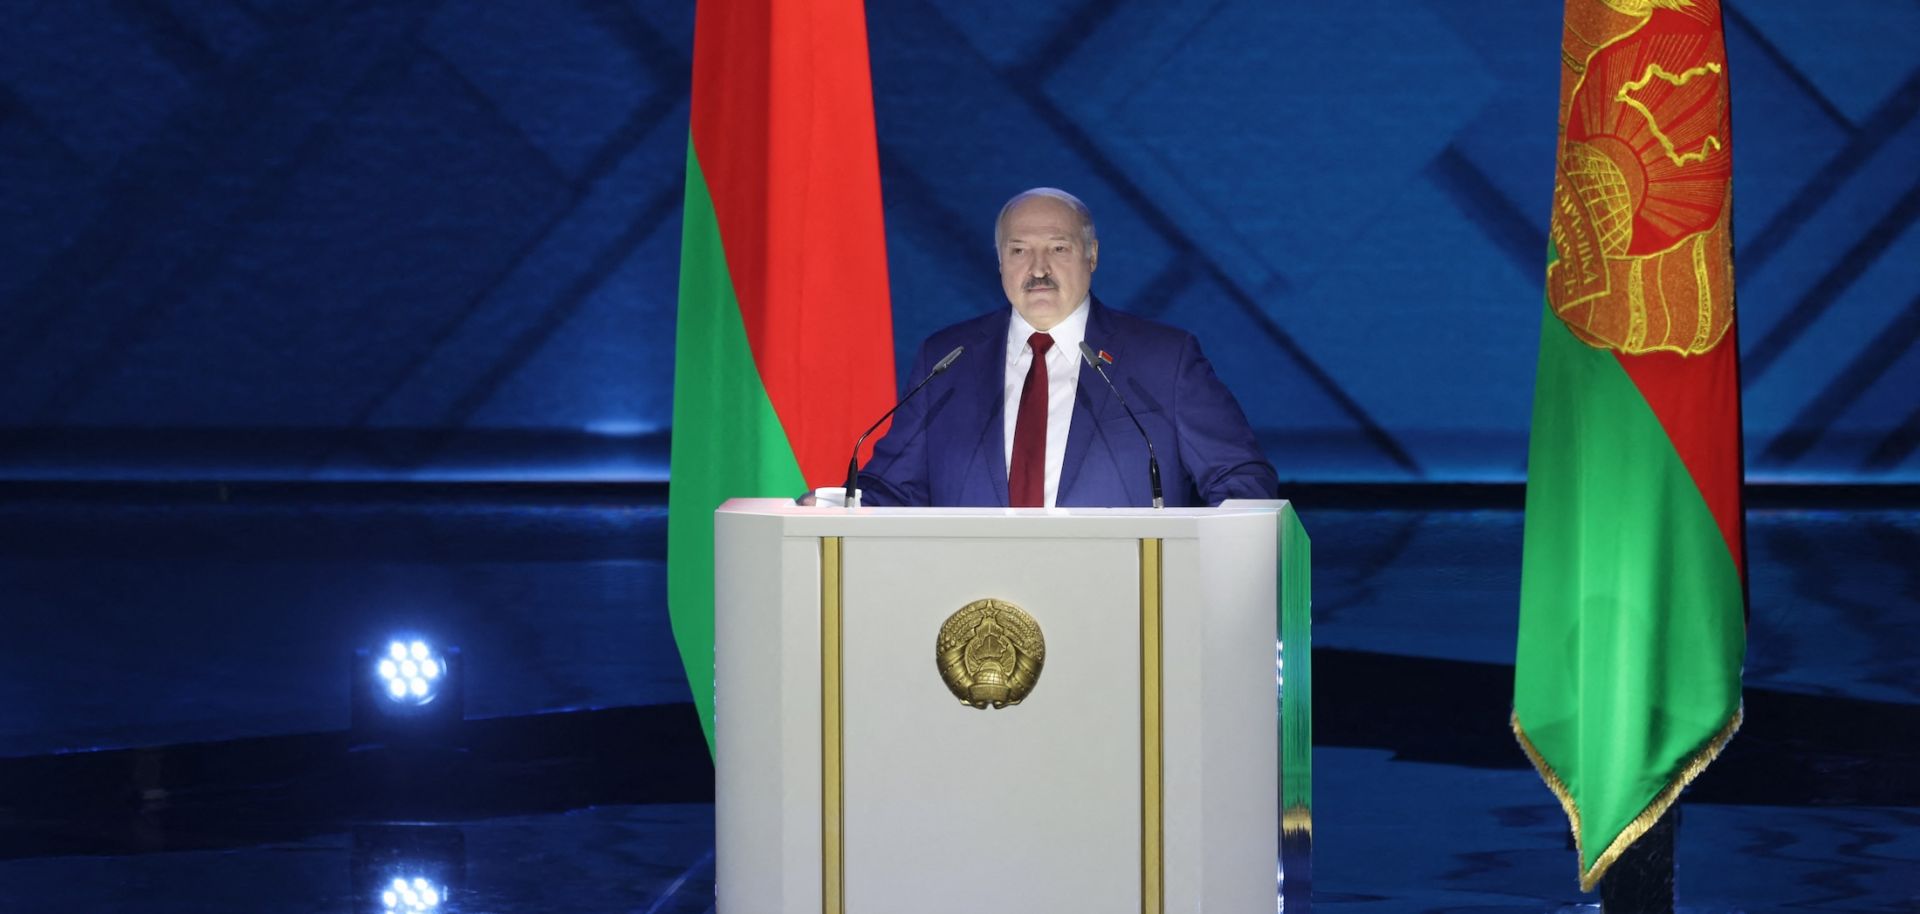 Belarus President Alexander Lukashenko gives a speech during his annual address to the Belarusian People and the National Assembly in Minsk on Jan. 28, 2022.